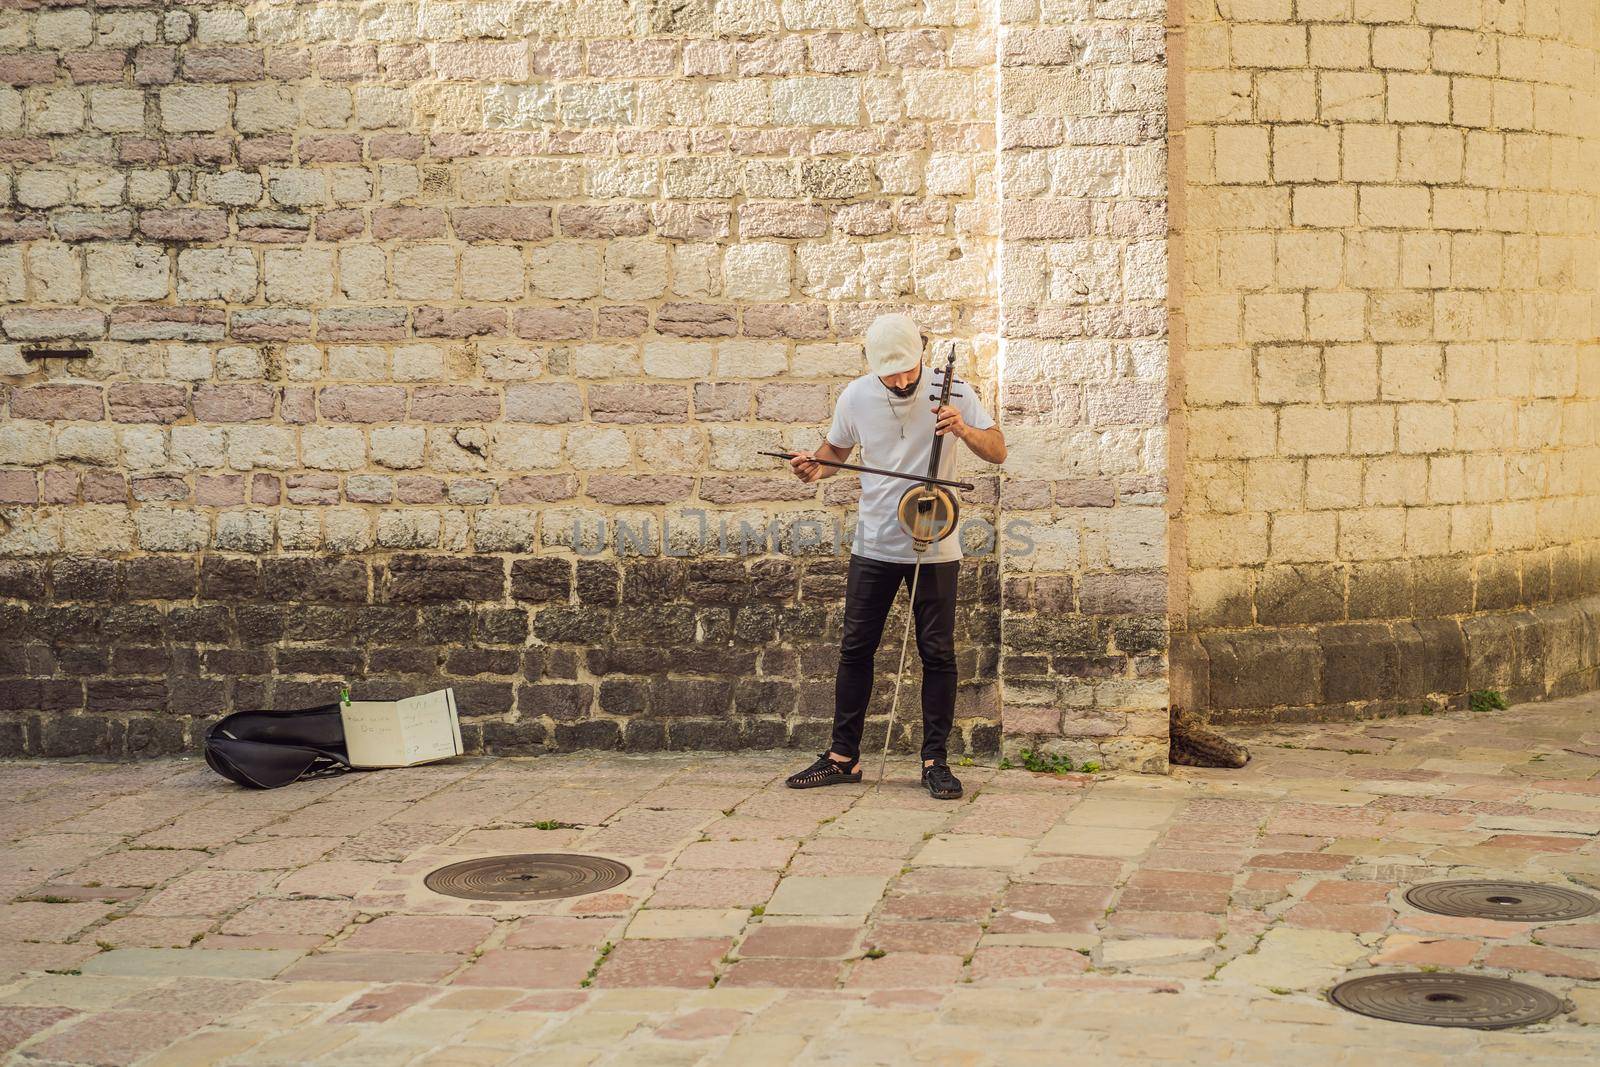 Montenegro Kotor May 27, 2022, the boy plays a musical instrument on the street, editorial.